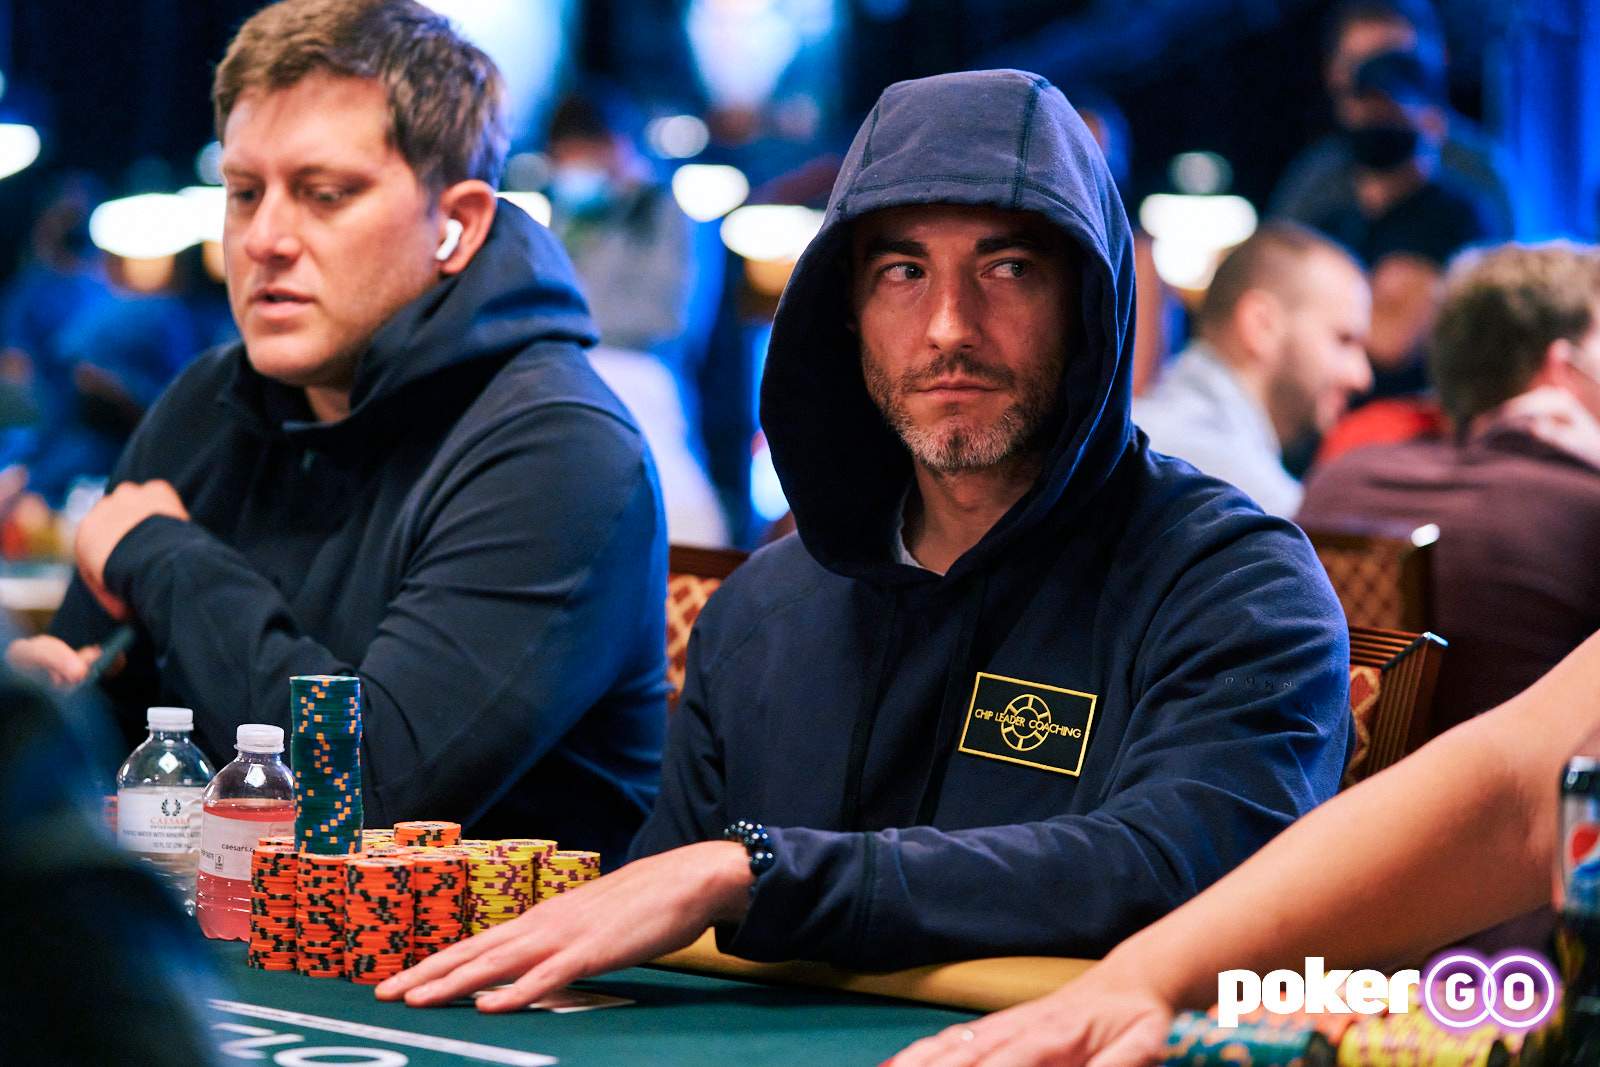 PokerGO WSOP Podcast: Broken Dreams and High Hopes On Day 4 of the Main Event